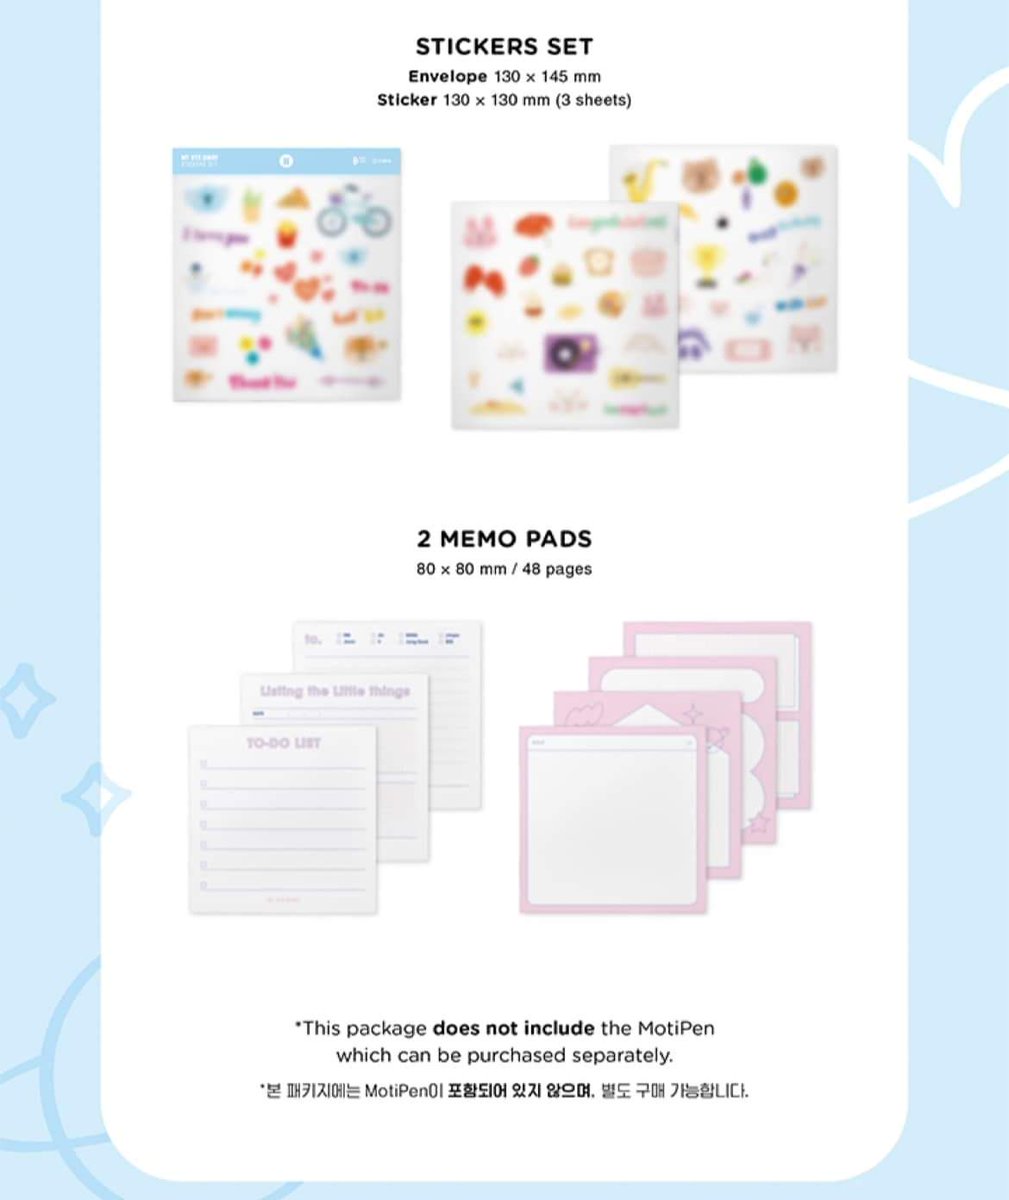 📍Pre order!

SET 2900php

✨My BTS Diary Tingi✨️
ℹ️ all slots must be taken to proceed

✅ Outbox+Dear BTS (128pages)1100php
✅ From BTS Book (184 pages) 1000php
✅ Envelope + Memo Pad 400php
✅ Memo Pads + Sticker 400php

DOP: 200 dp PAYO bal March 15 

Comment mine + item